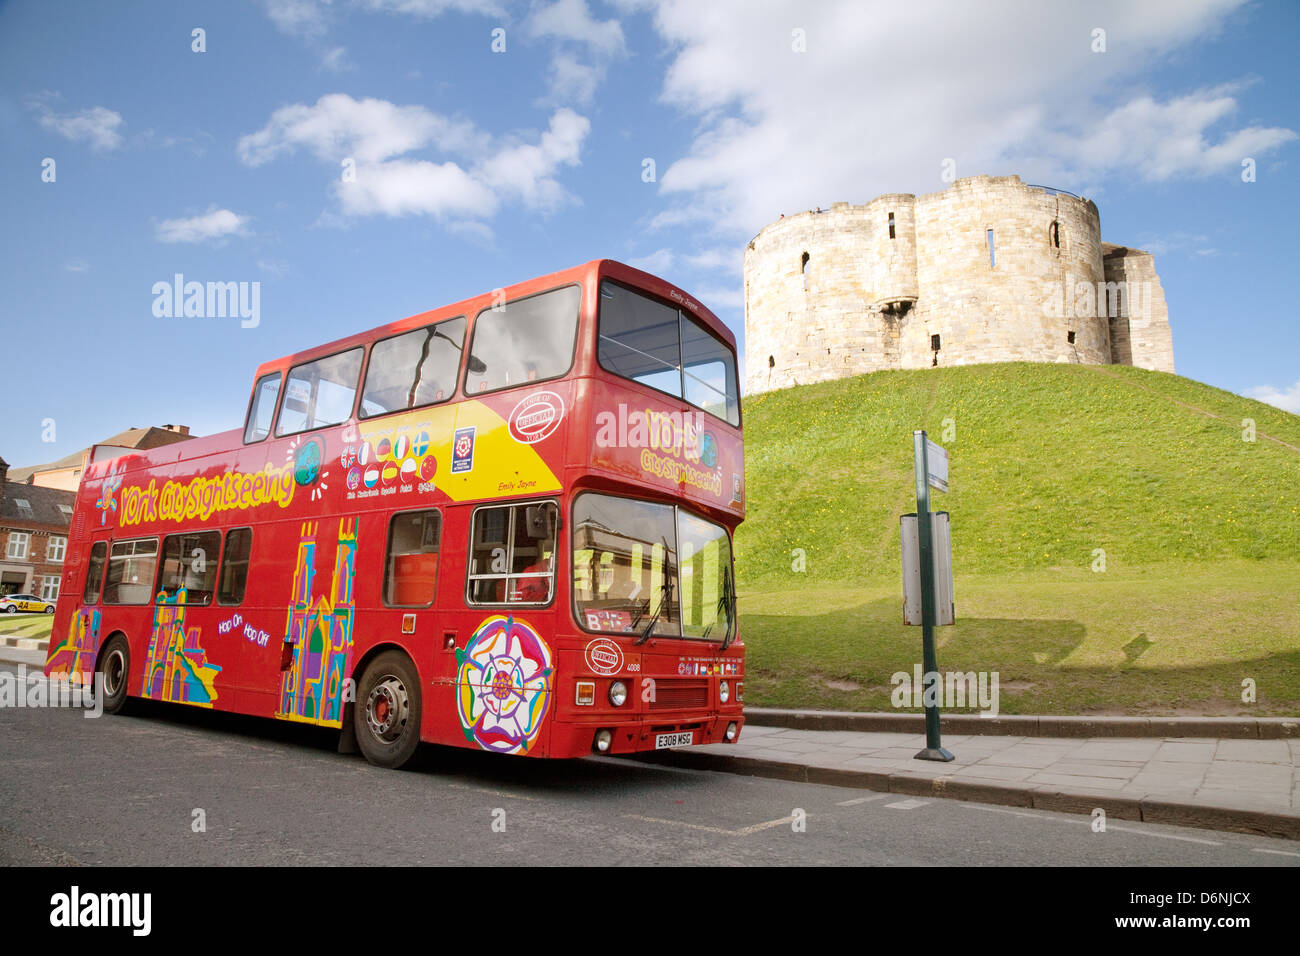 A red double decker York tourist bus sight seeing tour at Cliffords Tower, York castle, Yorkshire UK Stock Photo